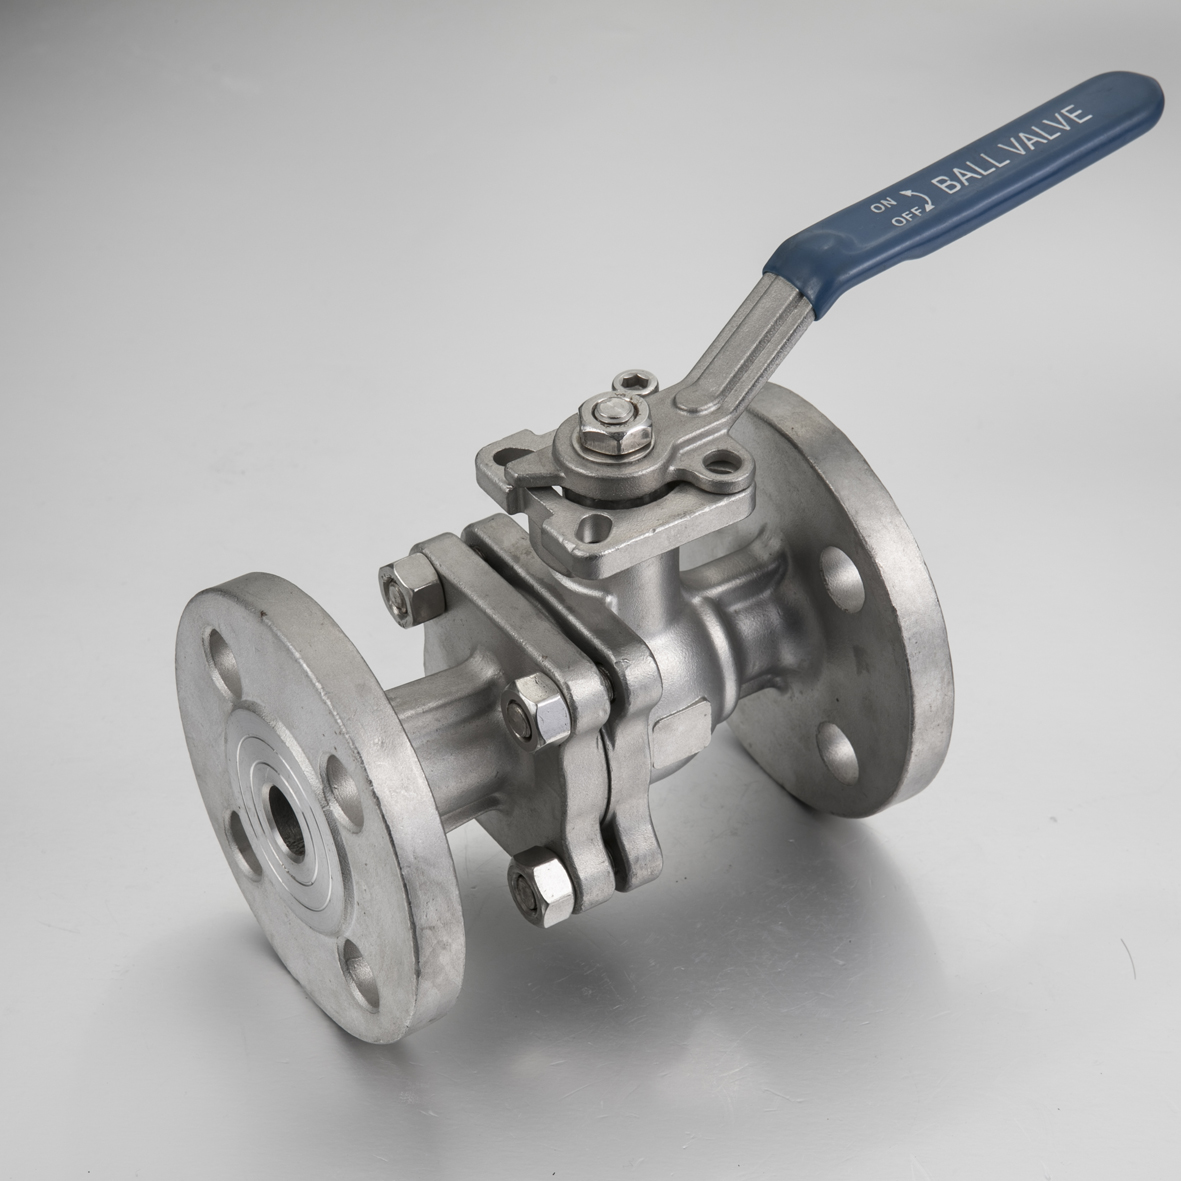 2pc Stainless Steel 304316 Flanged Ball Valve Buy 2pc Ball Valve Ball Valve Stainless Steel 3915